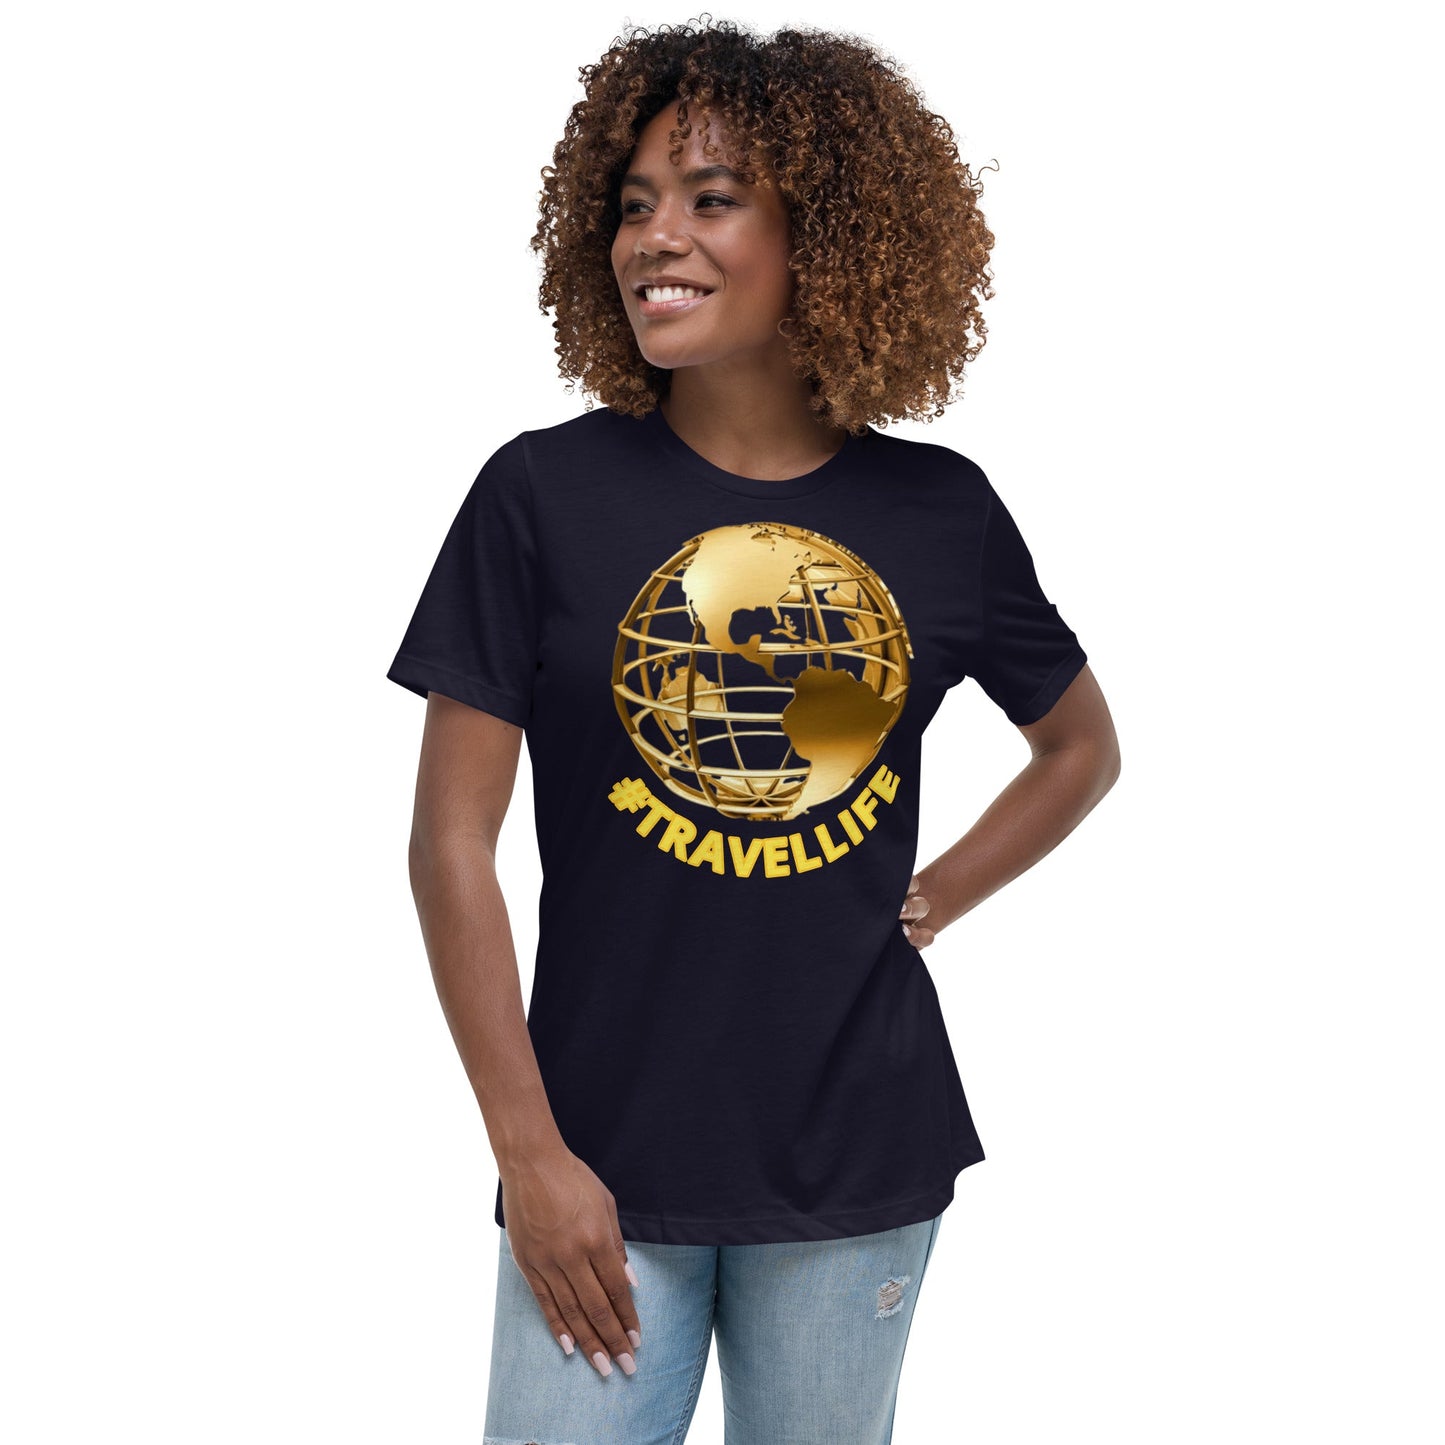 #Travellife World Women's Black Relaxed T-Shirt Large Gold Text 2X+